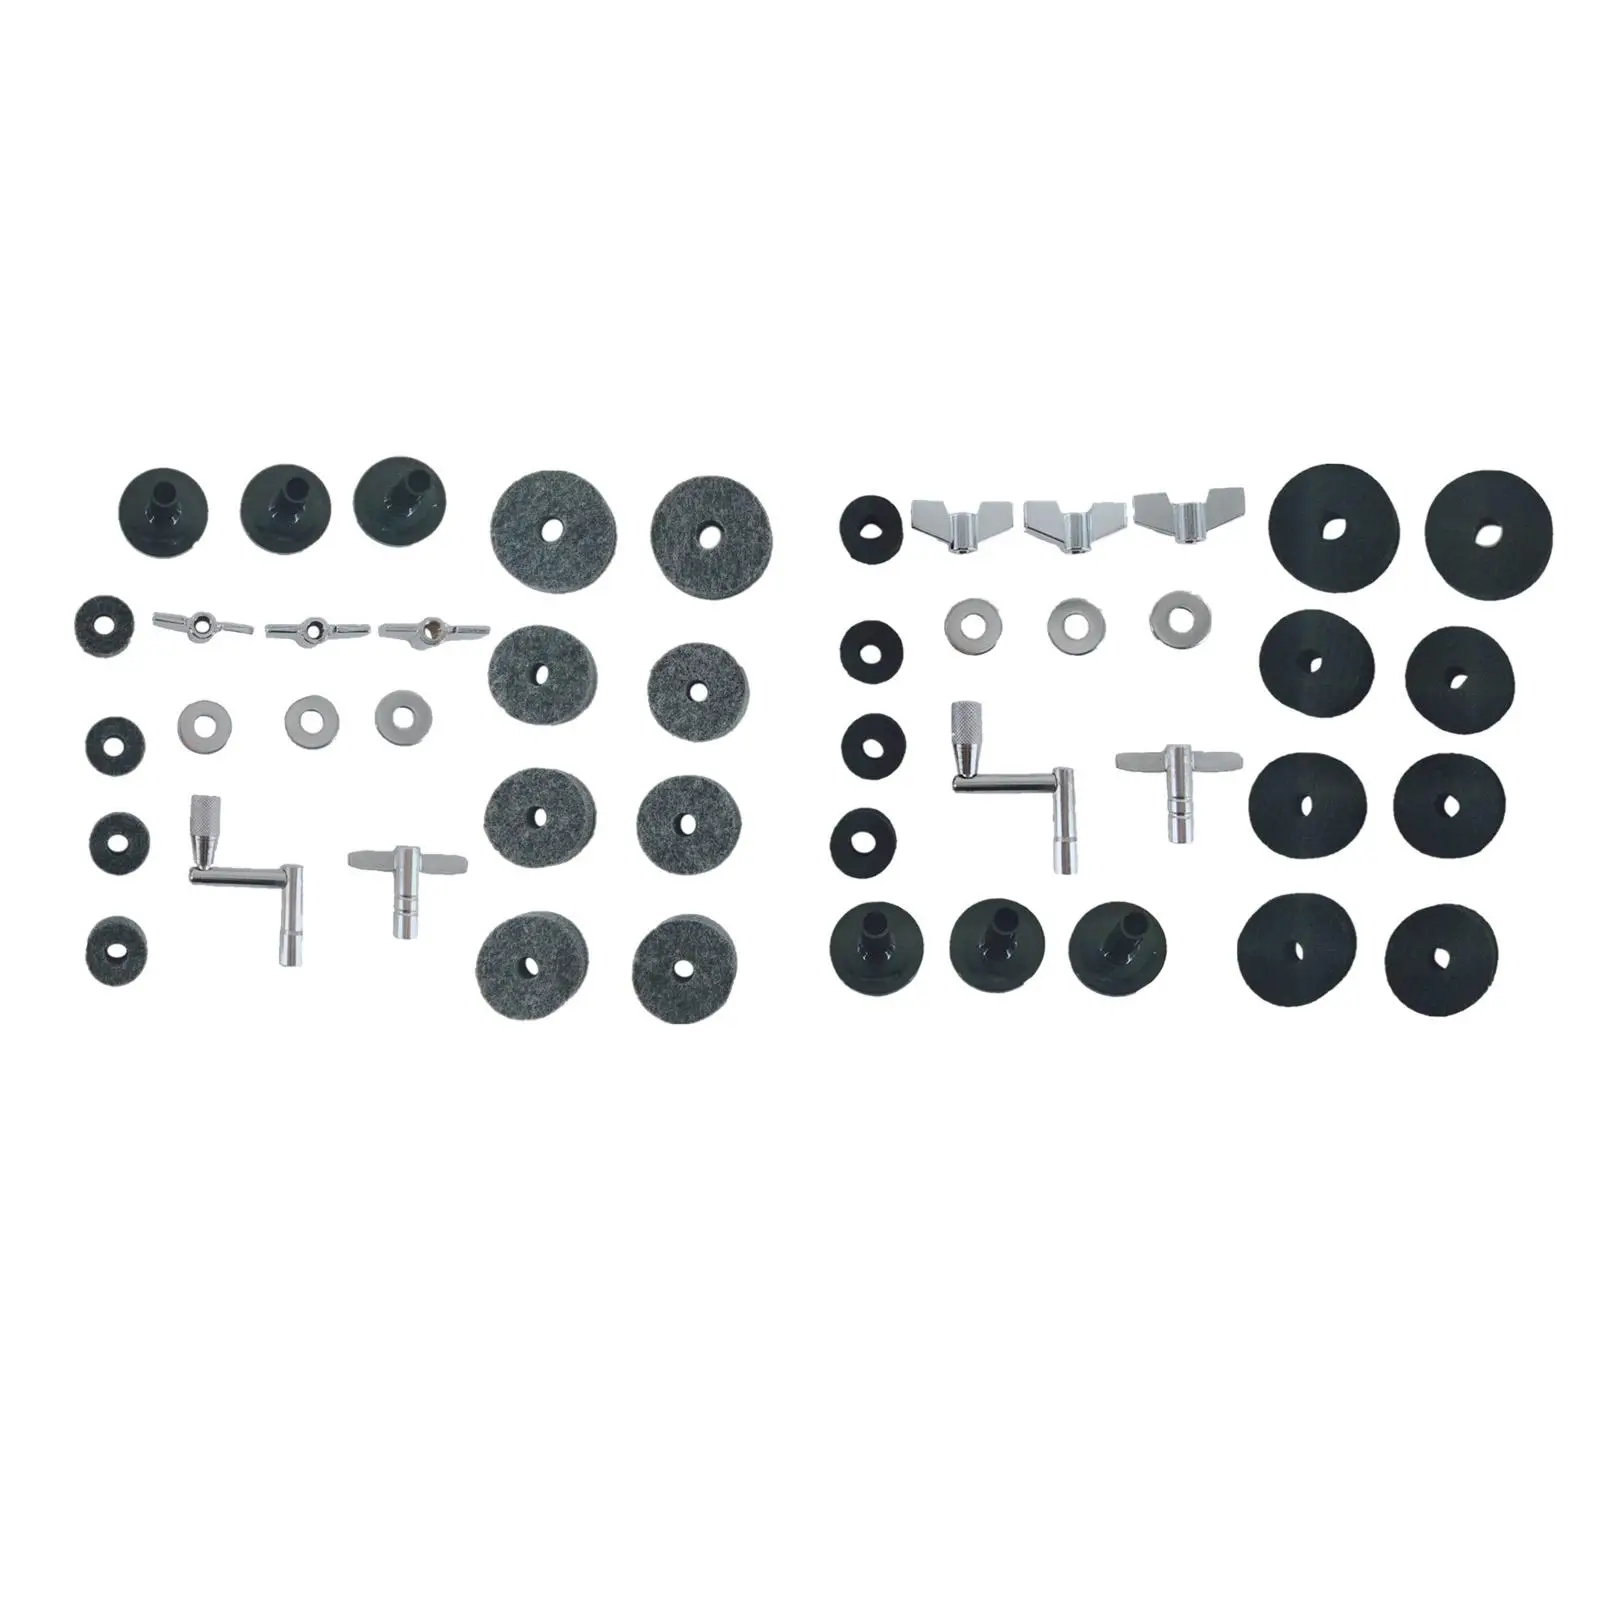 23 Pieces Replacement Cymbal Felt Washer Cymbal Replacement Cymbal Washer Drum Accessories Attachment Drum Sets Replacement